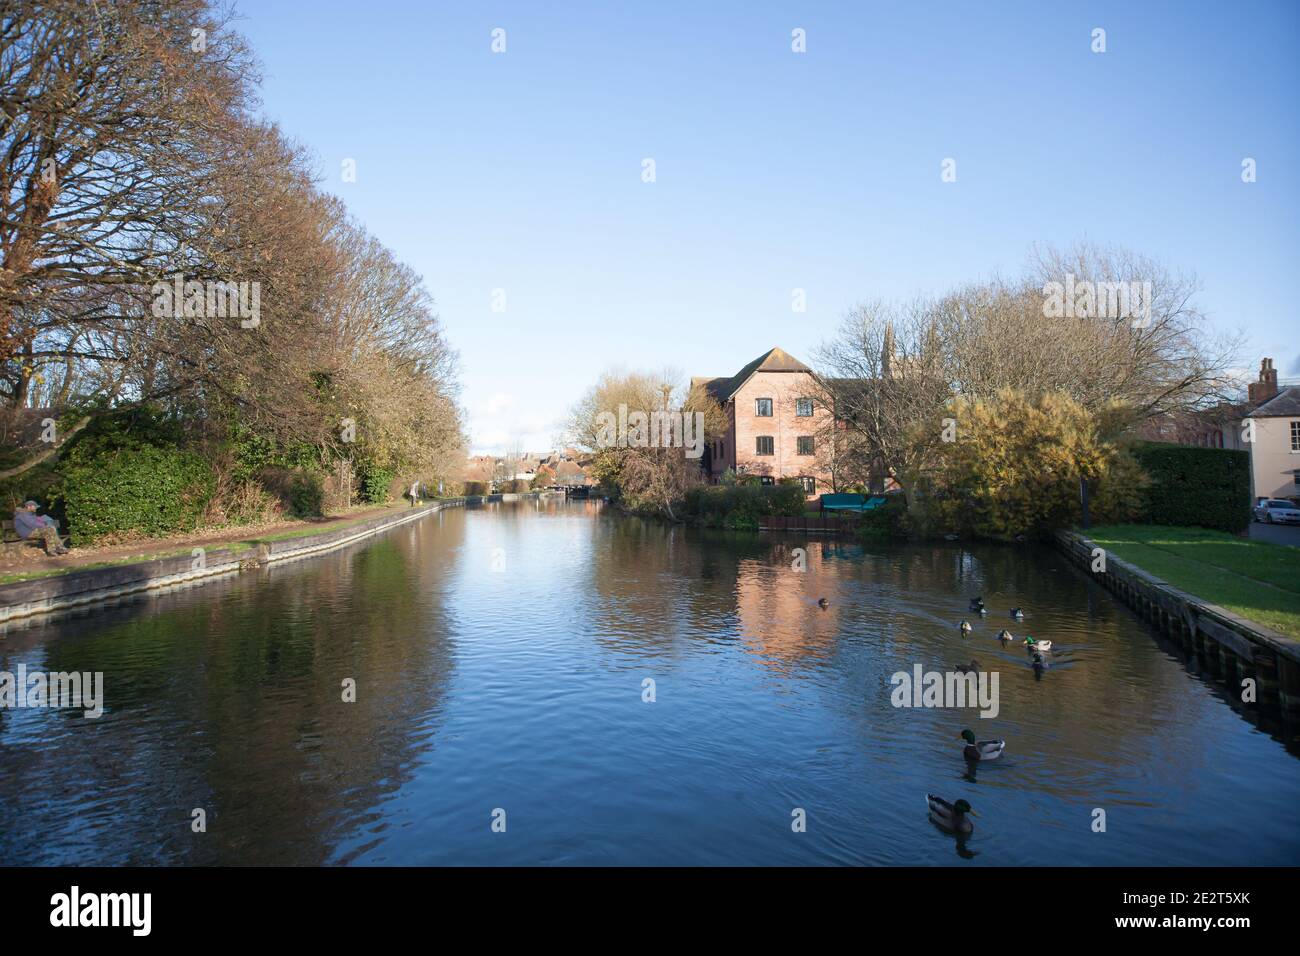 Views of the canal from Newbury Lock in West Berkshire in the UK, taken on the 19th November 2020 Stock Photo